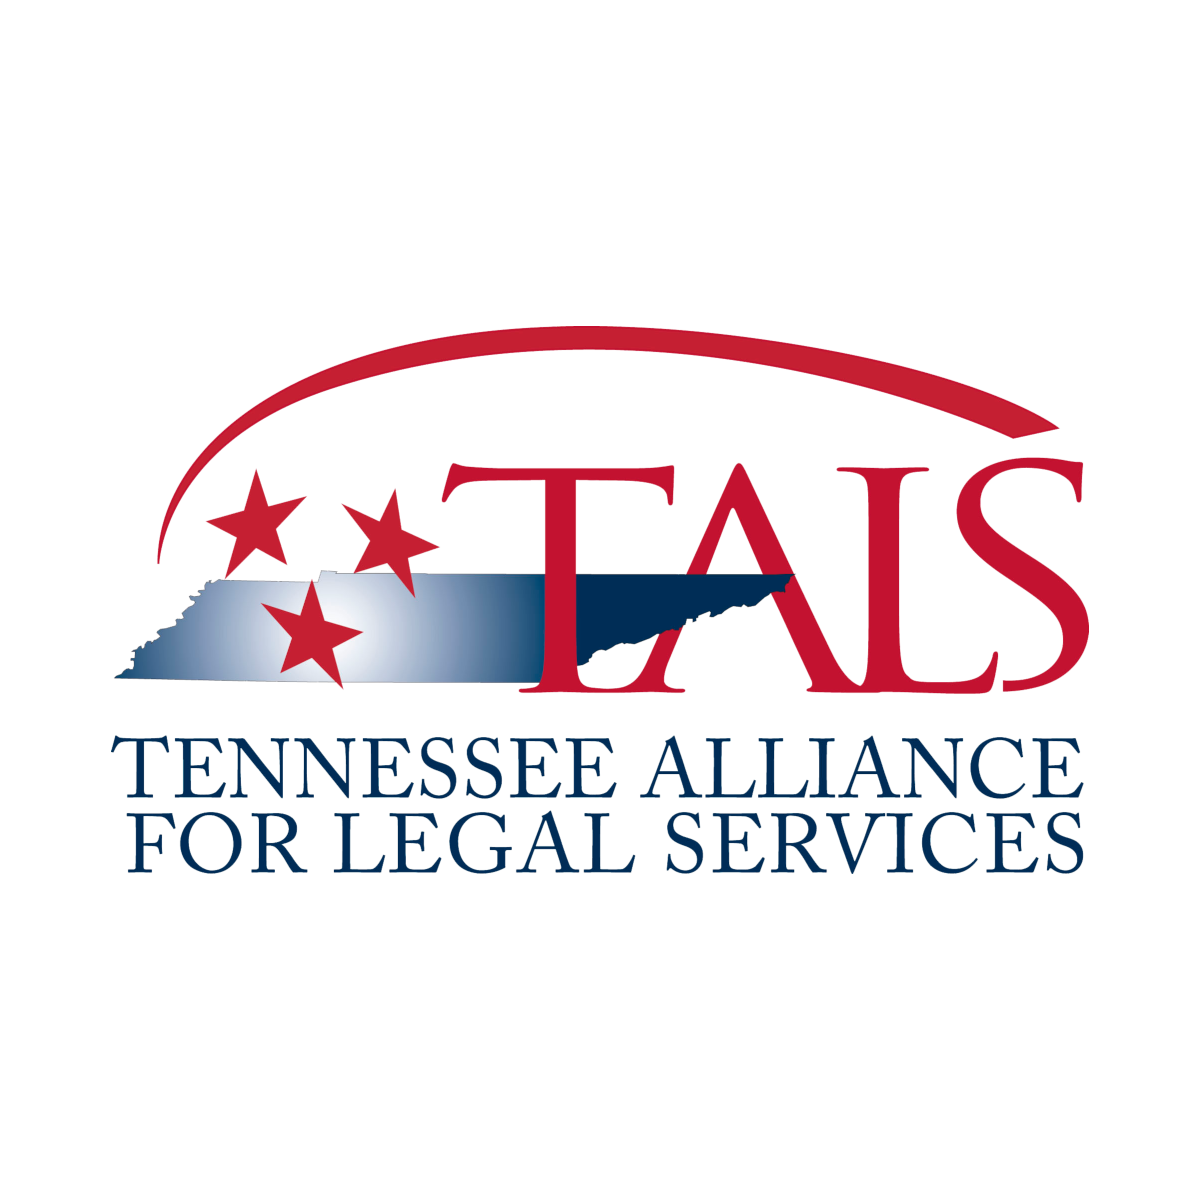 Tennessee Alliance for Legal Services